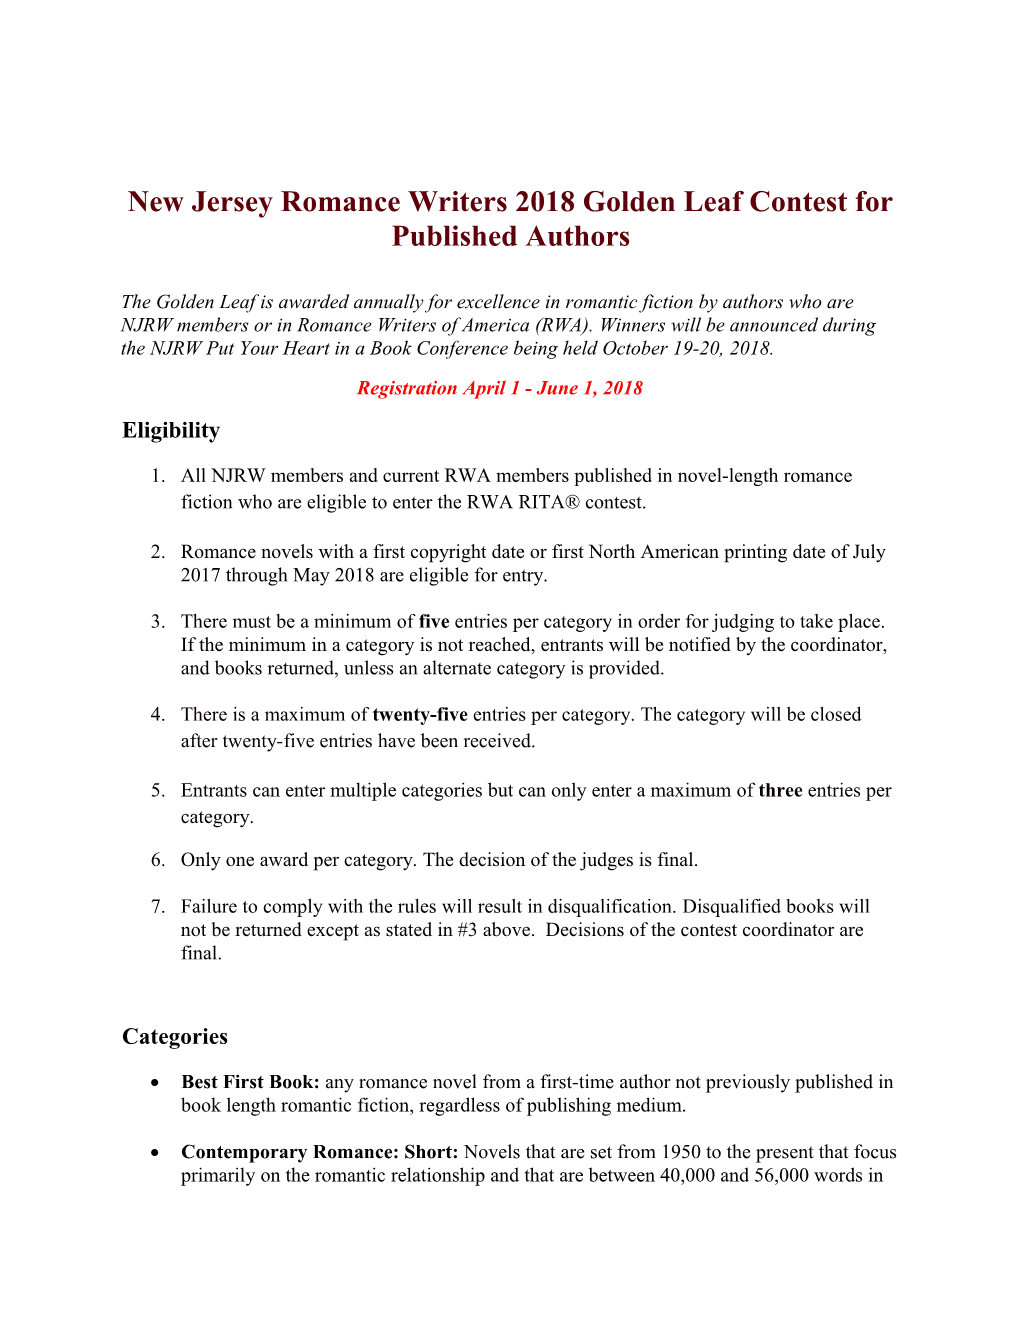 New Jersey Romance Writers 2018 Golden Leaf Contest for Published Authors